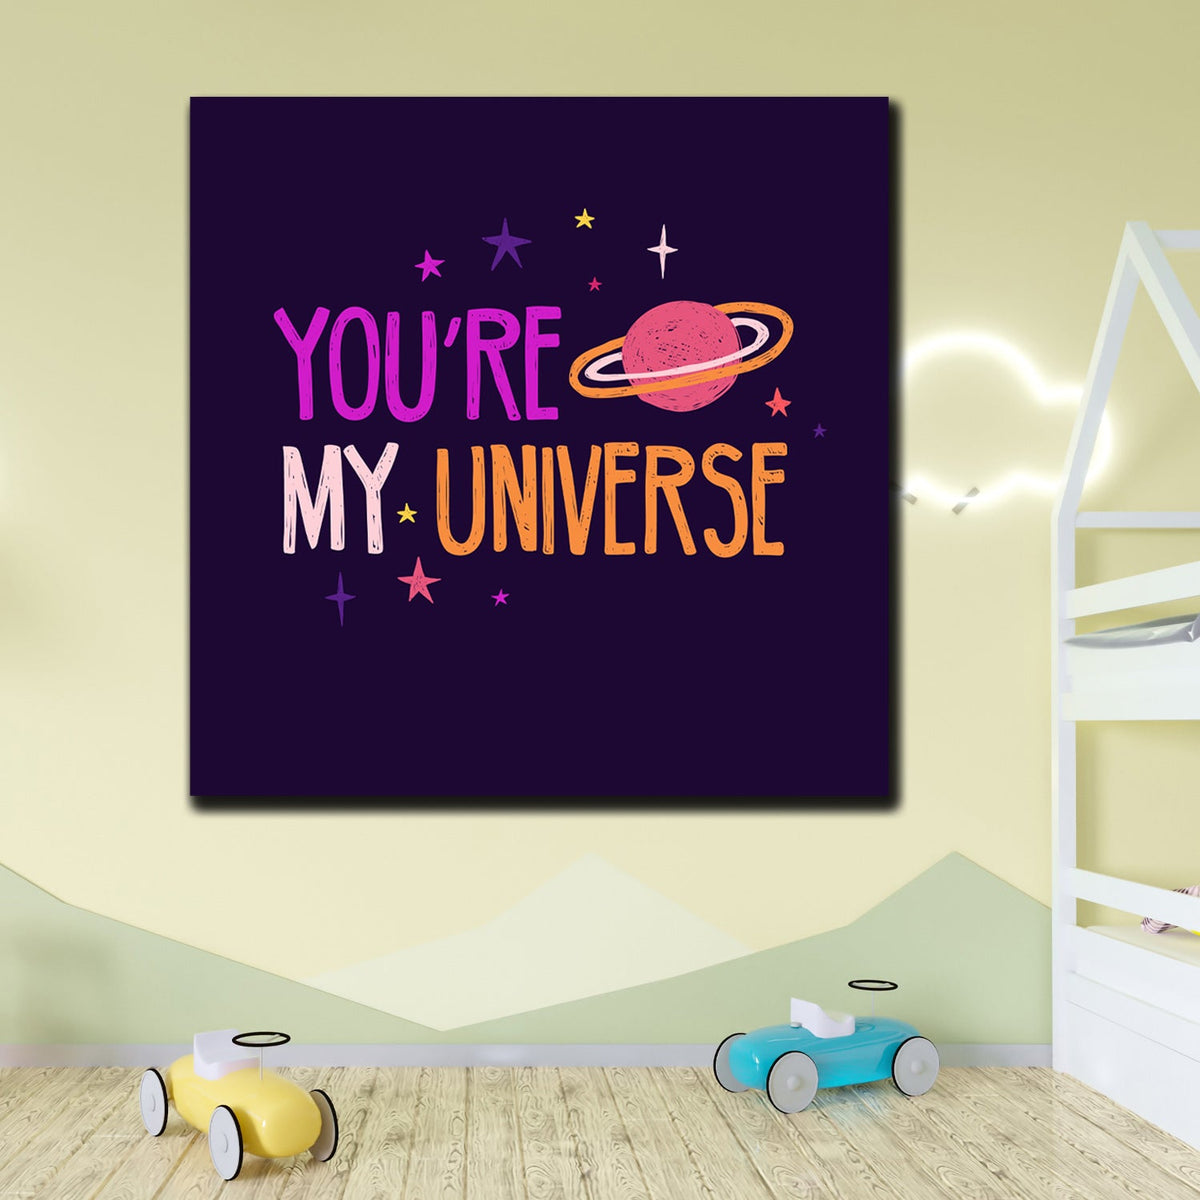 https://cdn.shopify.com/s/files/1/0387/9986/8044/products/YouaremyUniverseCanvasArtprintStretched-2.jpg